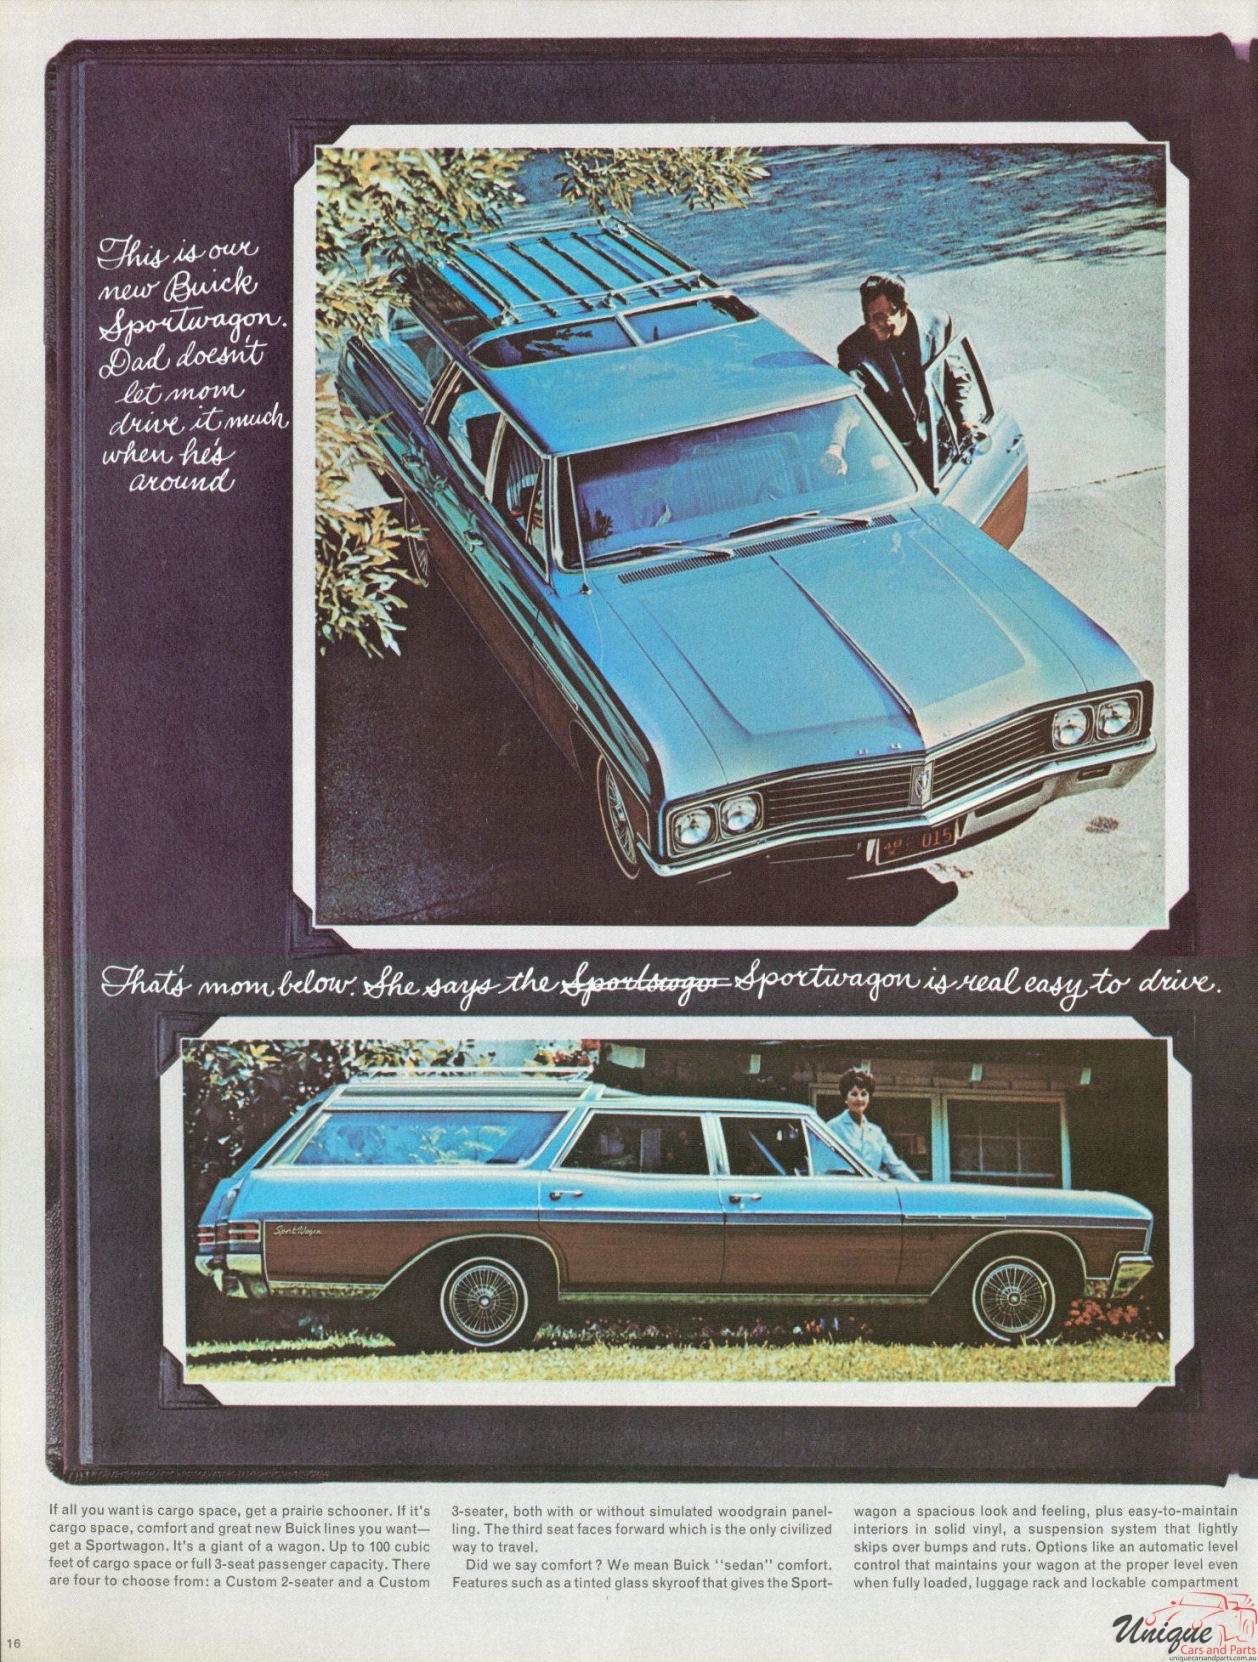 1967 Buick Canadadian Brochure Page 15